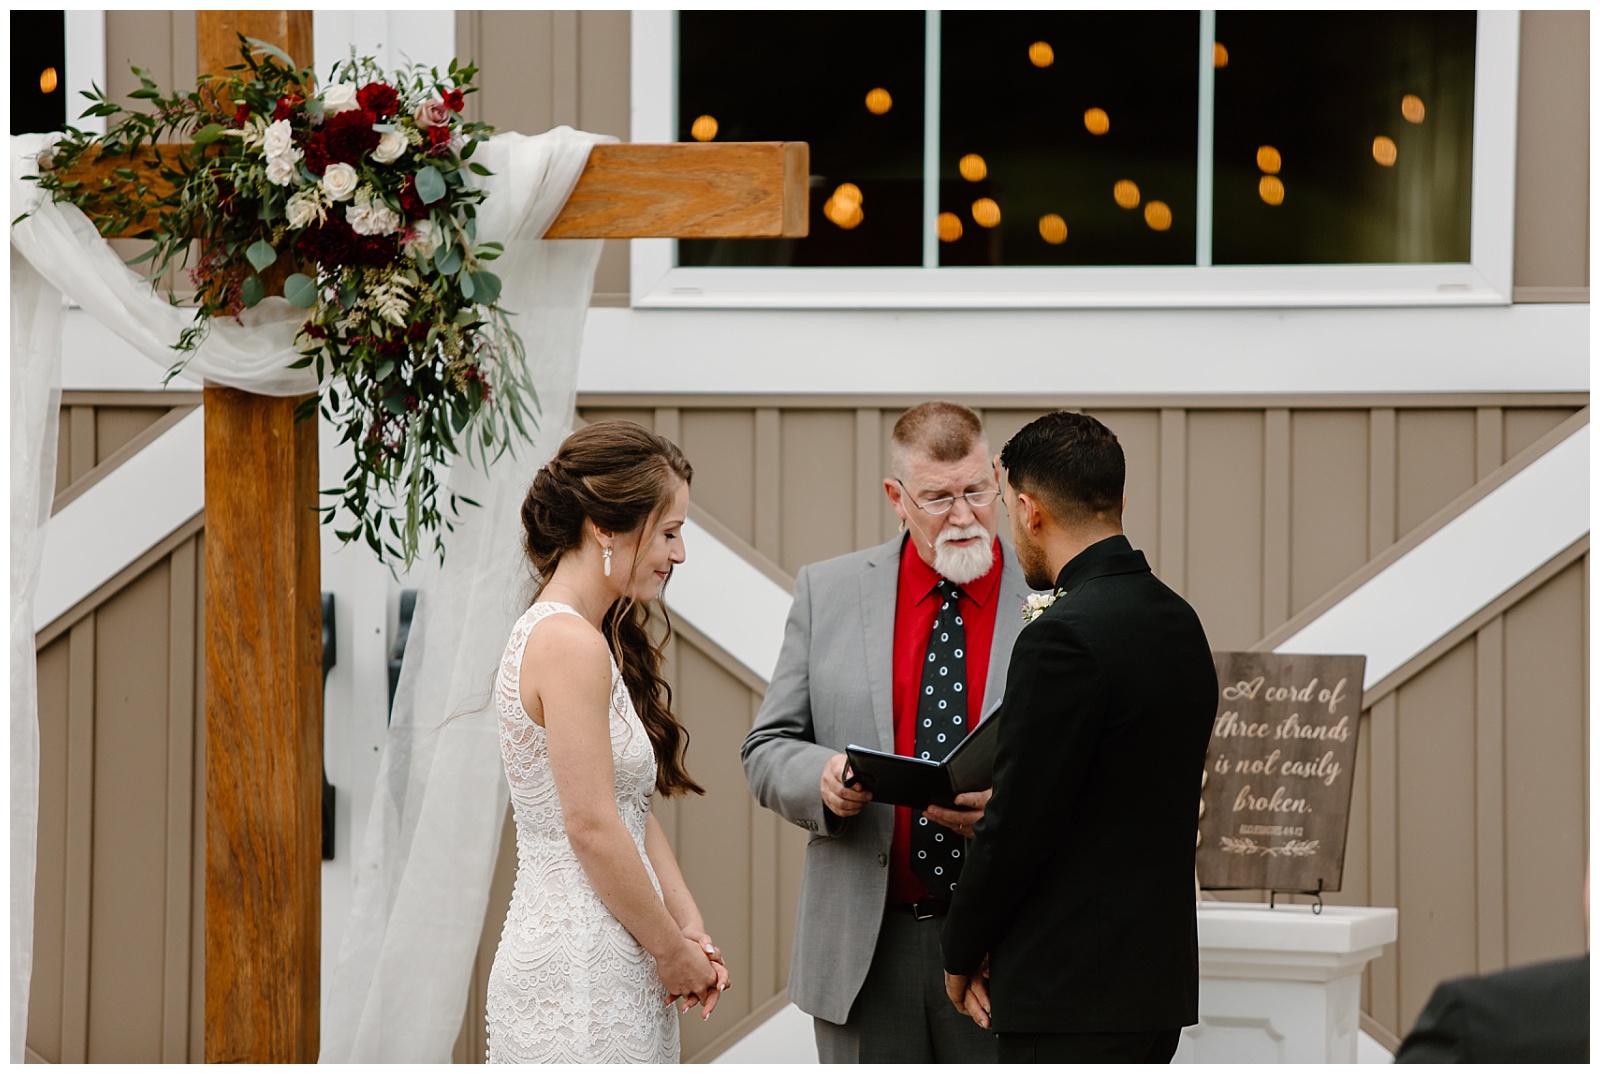 Pastor speaks and holds Bible during wedding ceremony